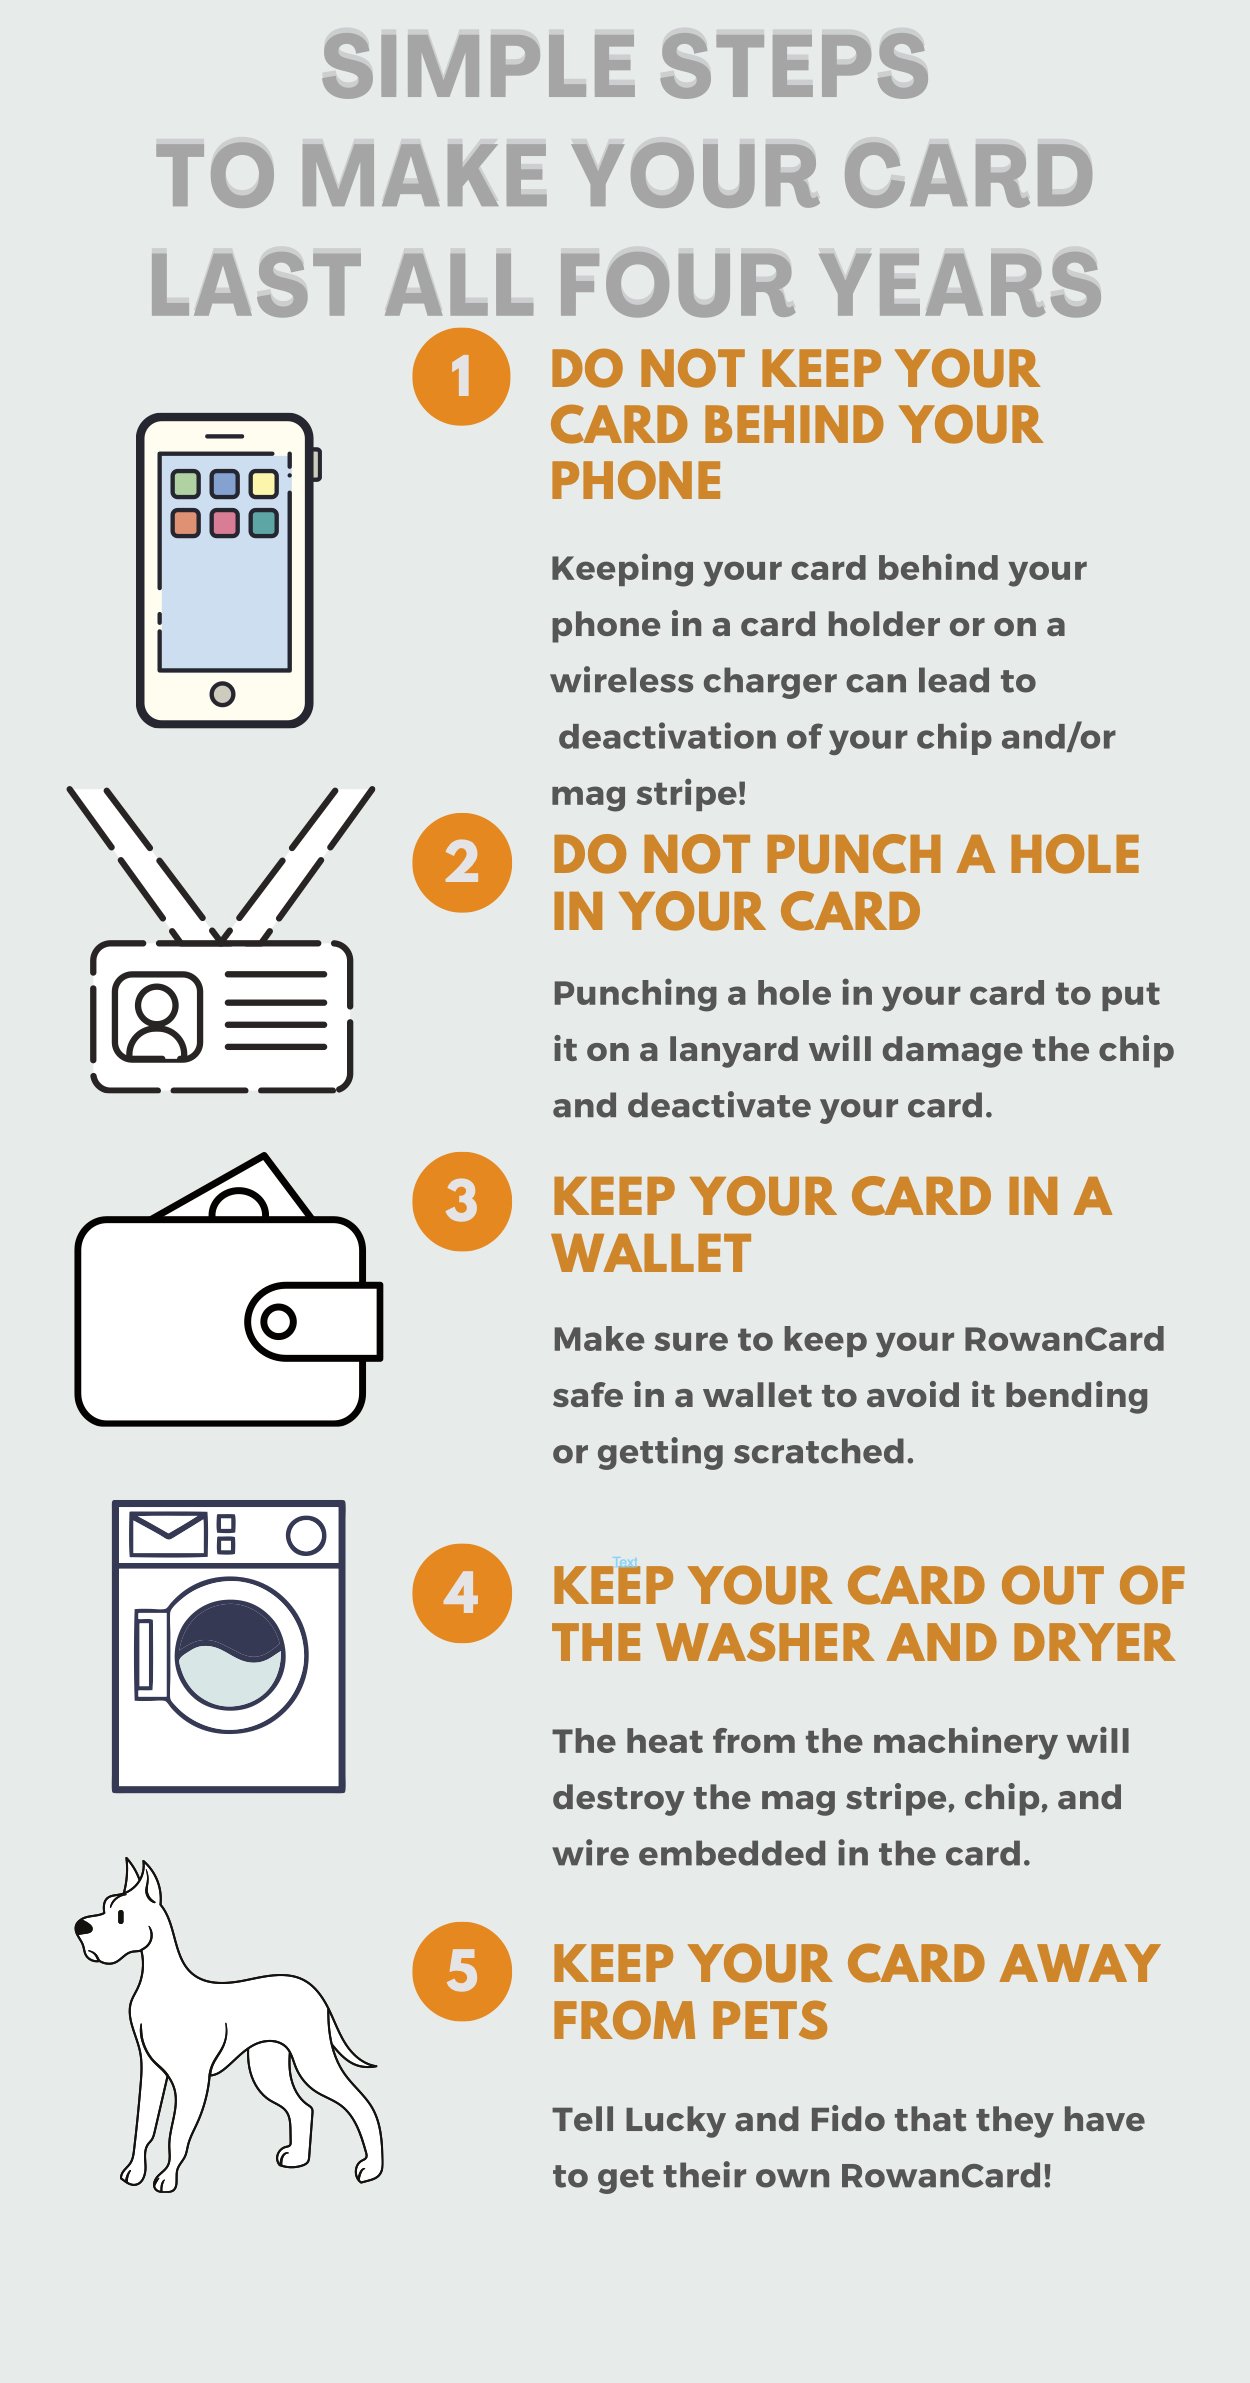 Tips to keep your RowanCard for 4 years